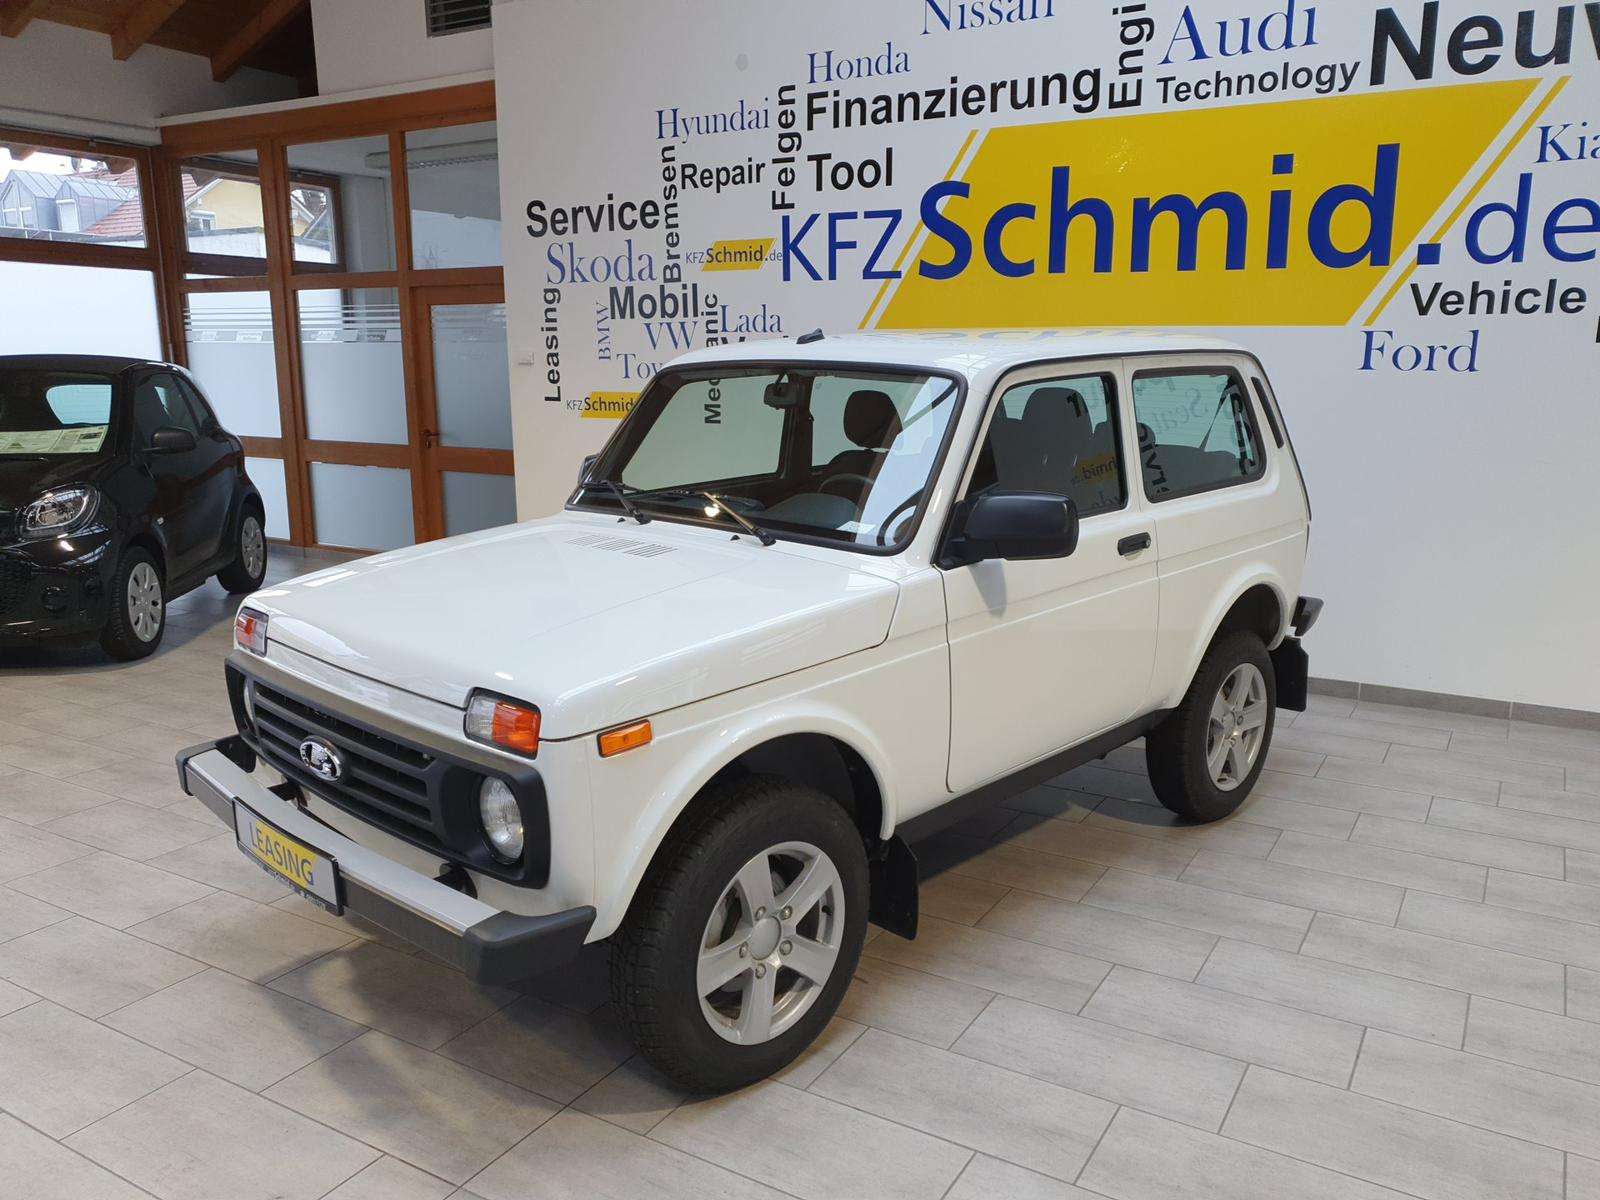 Lada Niva Off-Road/Pick-up in White new in Weilheim i. OB for € 14,990.-